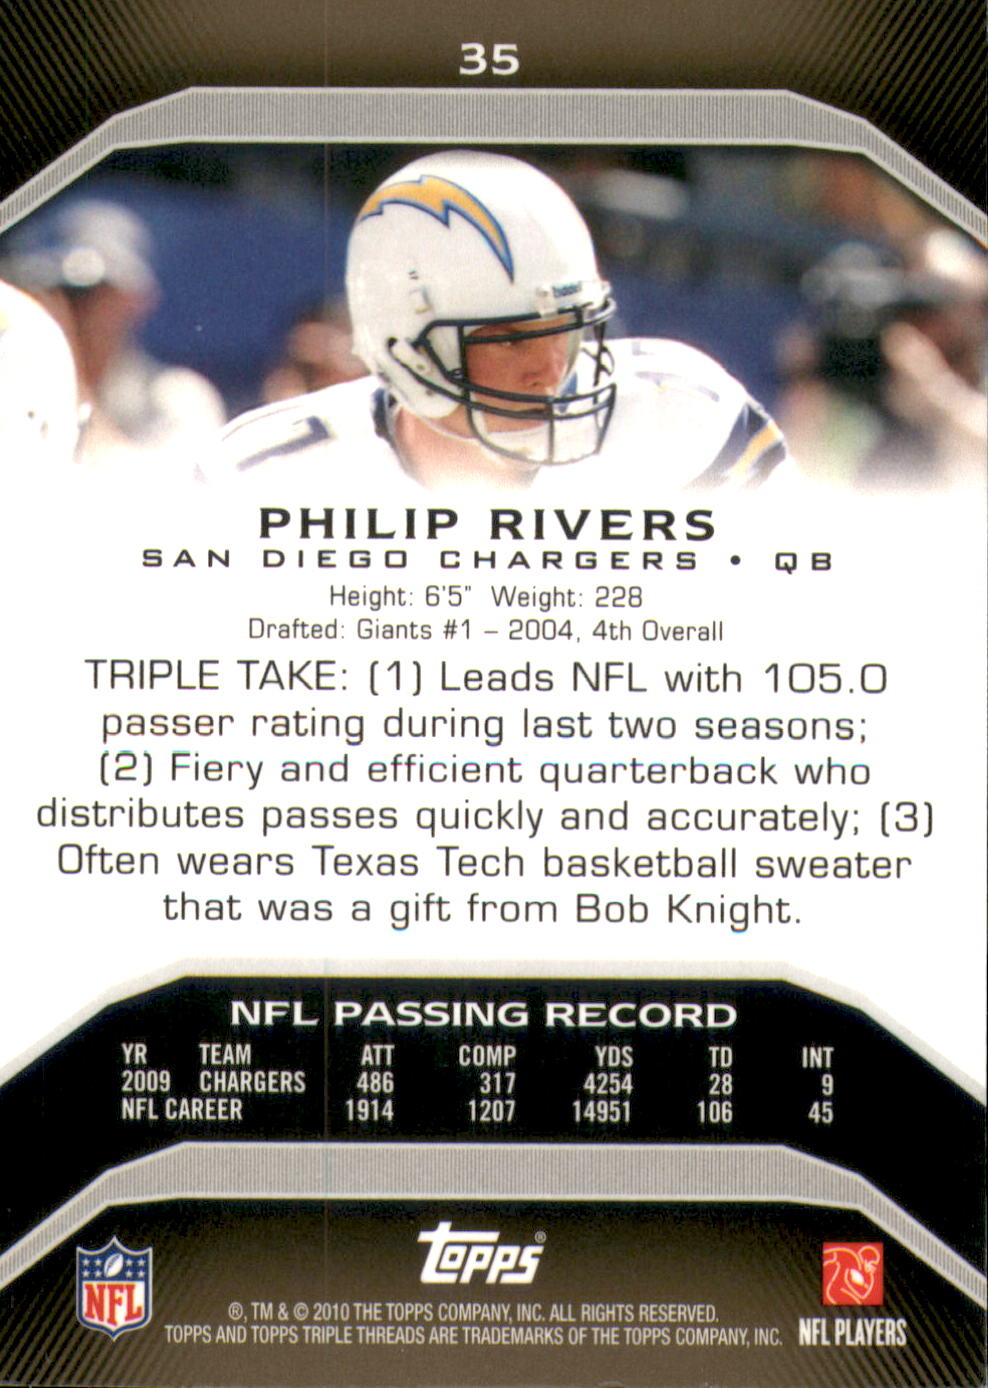 2010 Topps Triple Threads Sepia #35 Philip Rivers back image